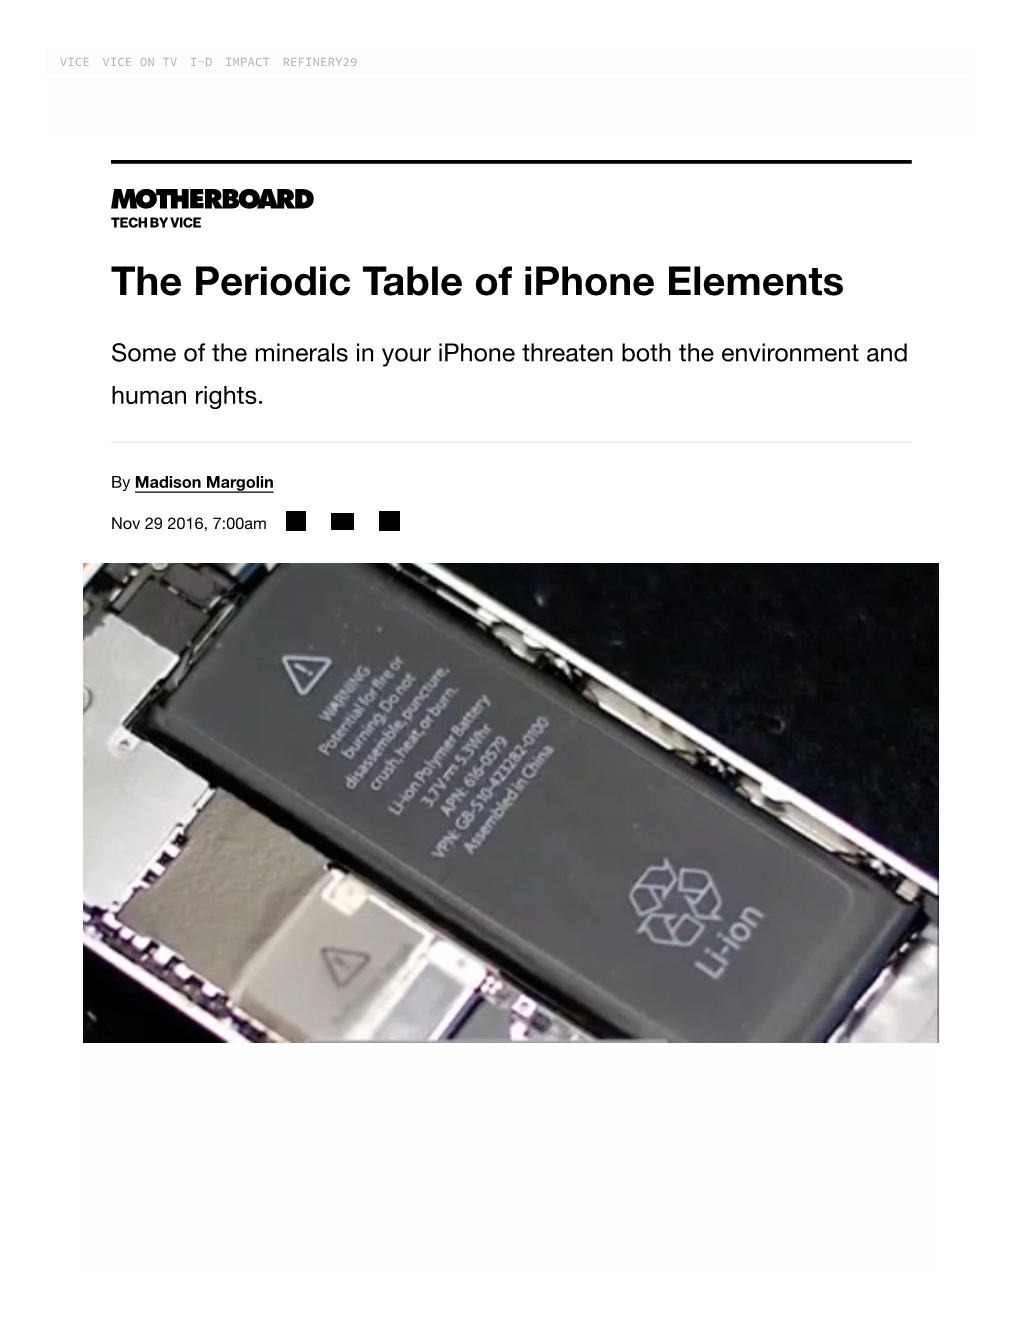 The Periodic Table of Iphone Elements